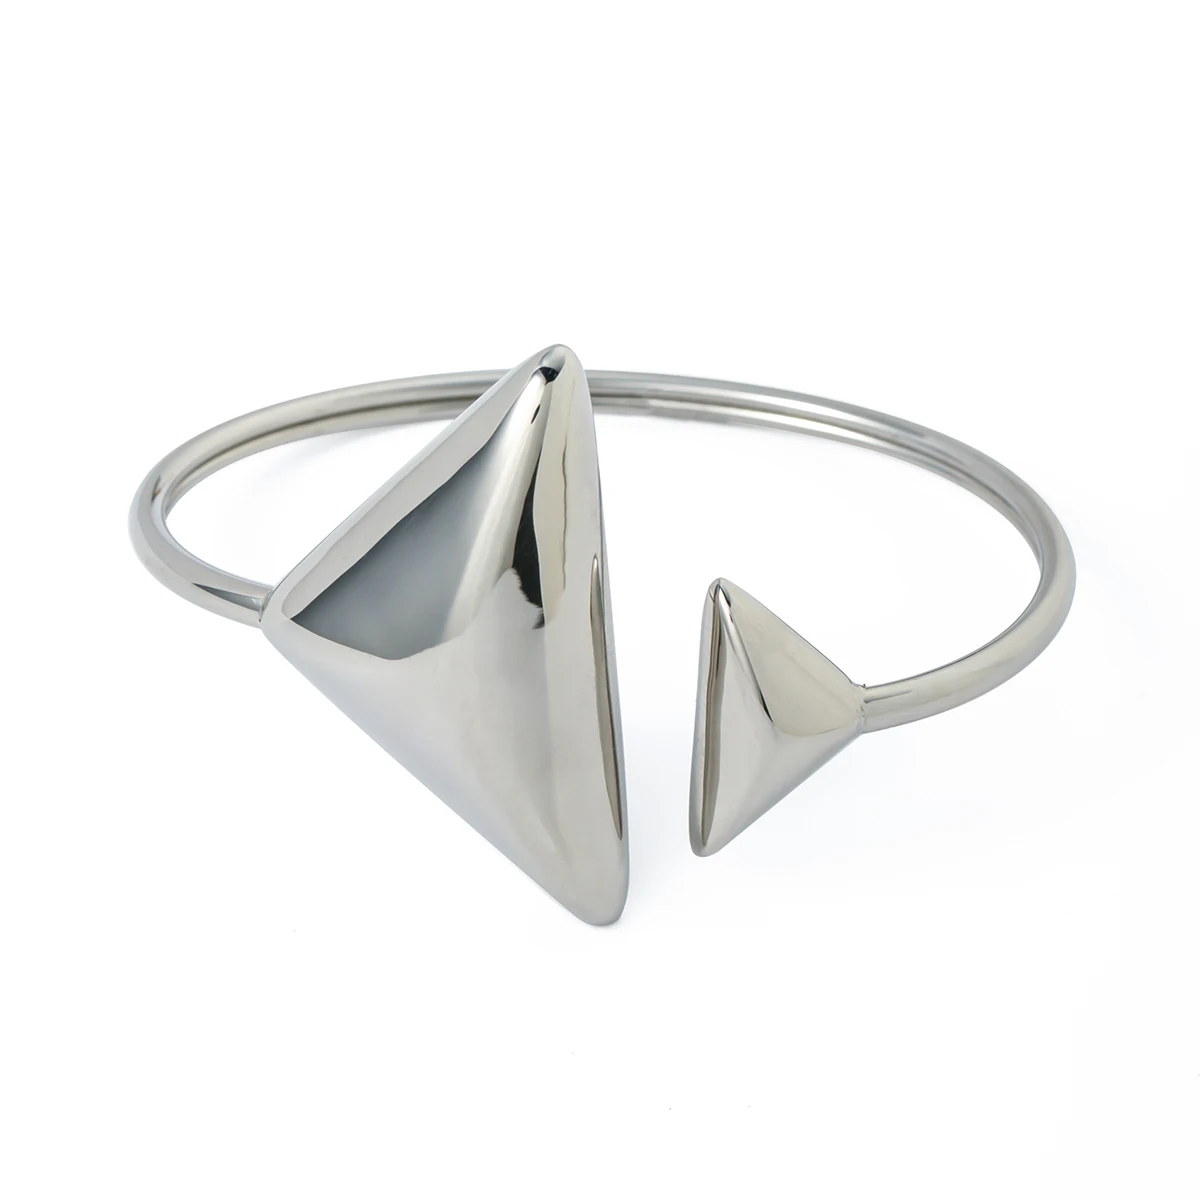 

J&D Clean Fit Stainless Steel Jewelry High Polish Geometric Stretch Triangle Tarnish Free Smooth Bangle